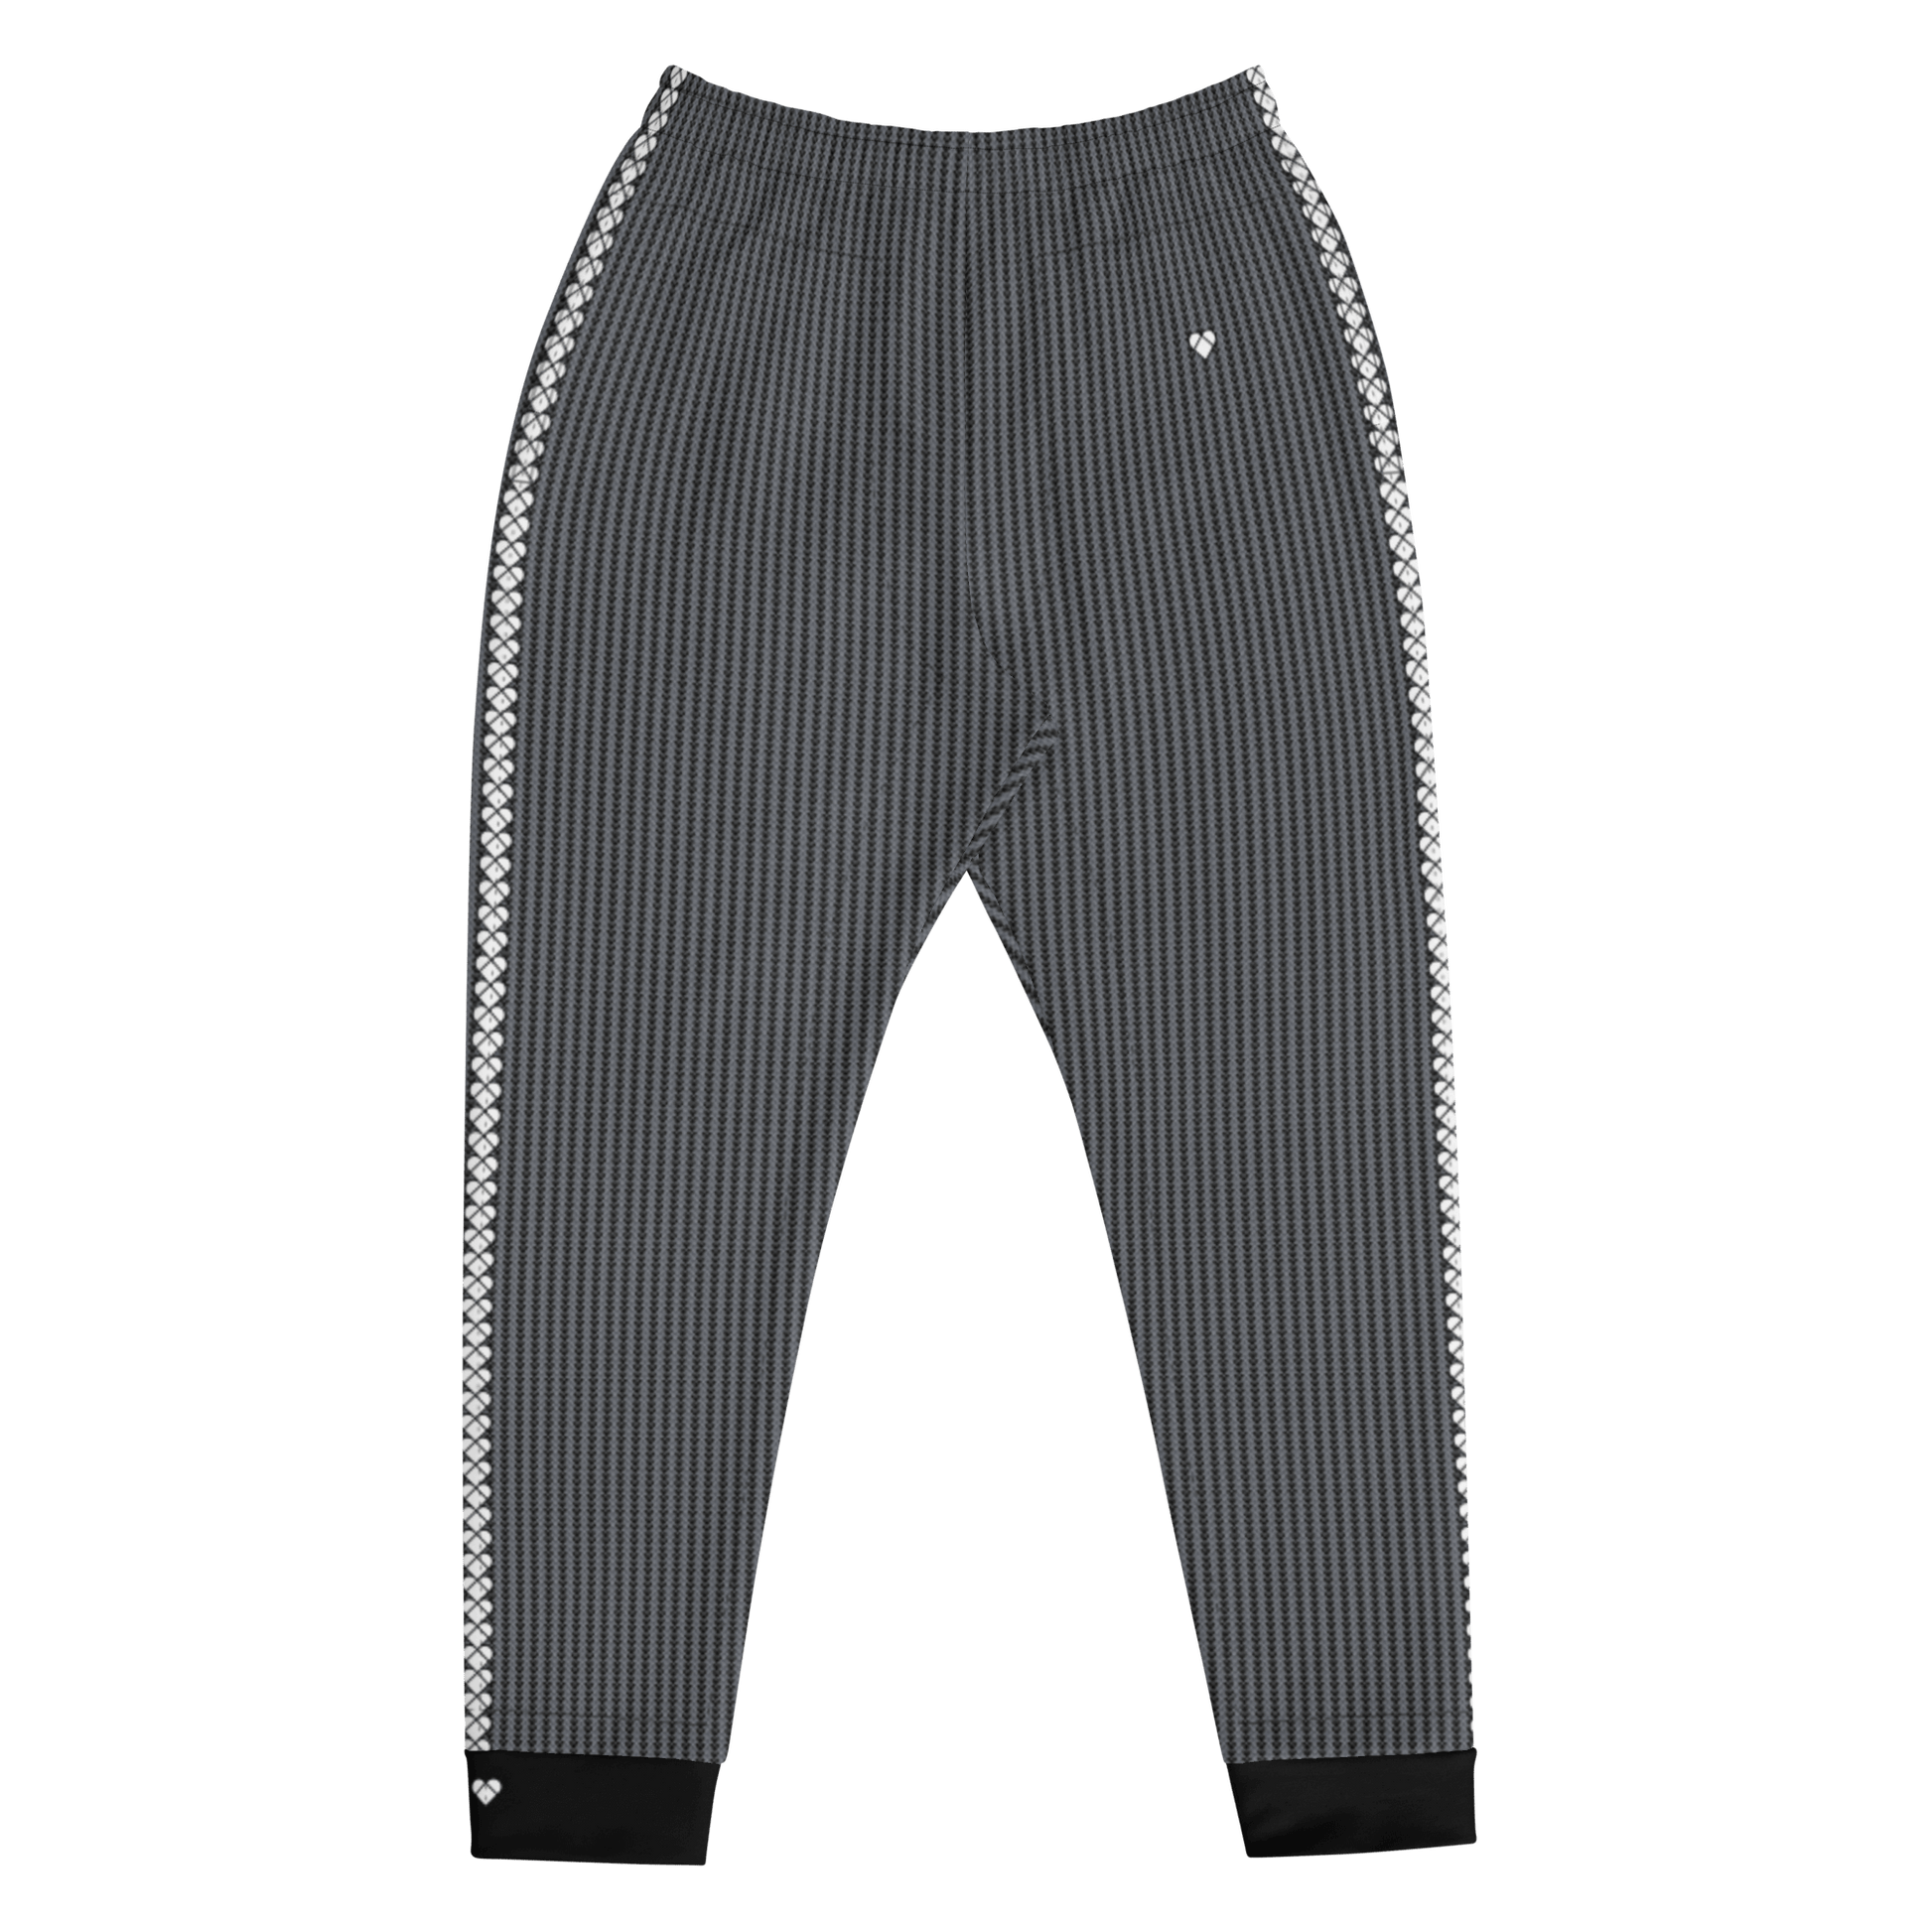 Black Joggers for Men from Amor Primero's Lovogram Collection with heart-shaped pattern, product photo front